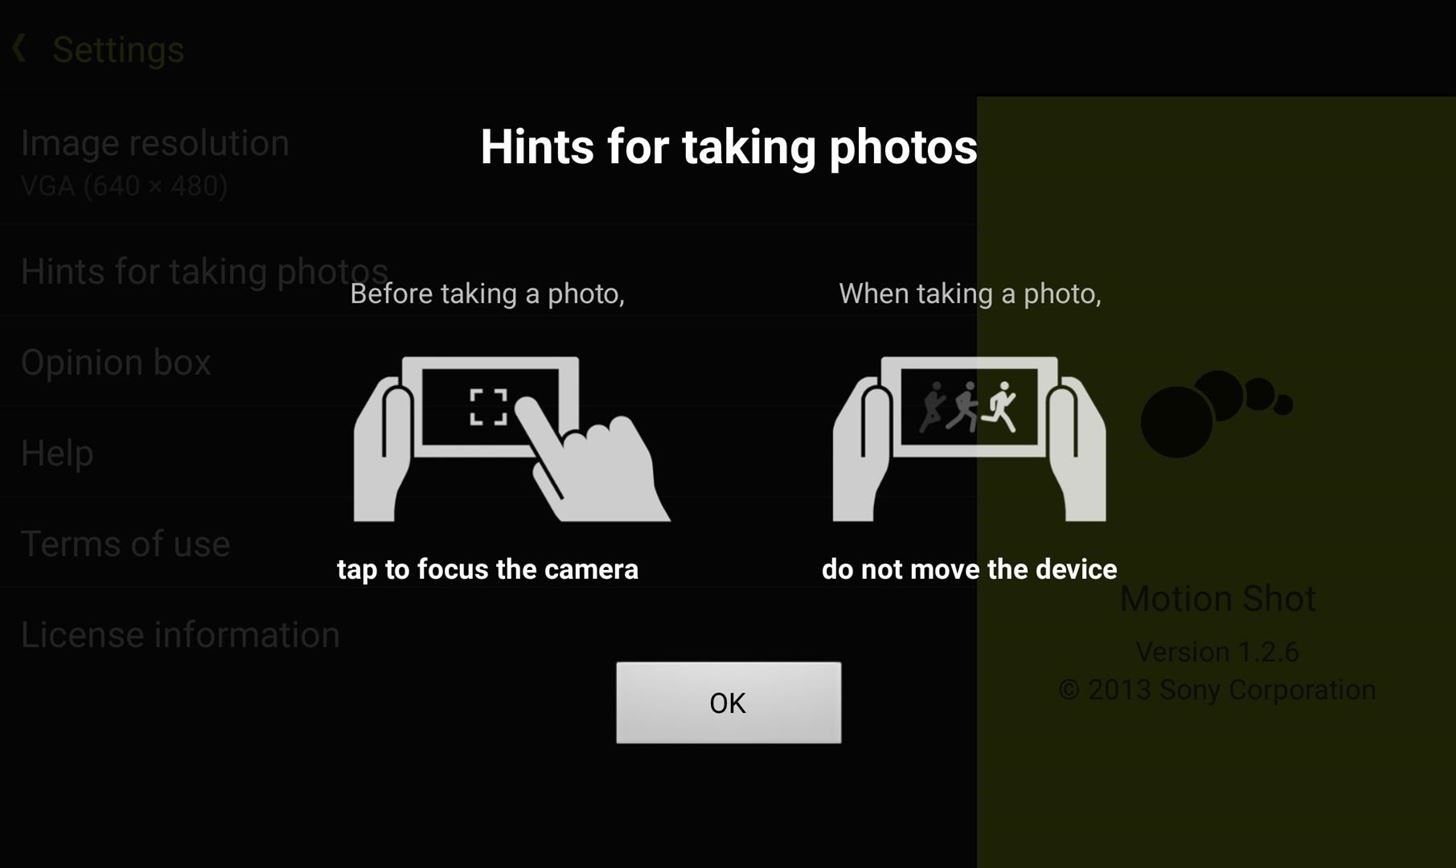 How to Install the Sony Xperia Z2 Camera on Any Android Phone for AR Effects, Motion Shots, & More